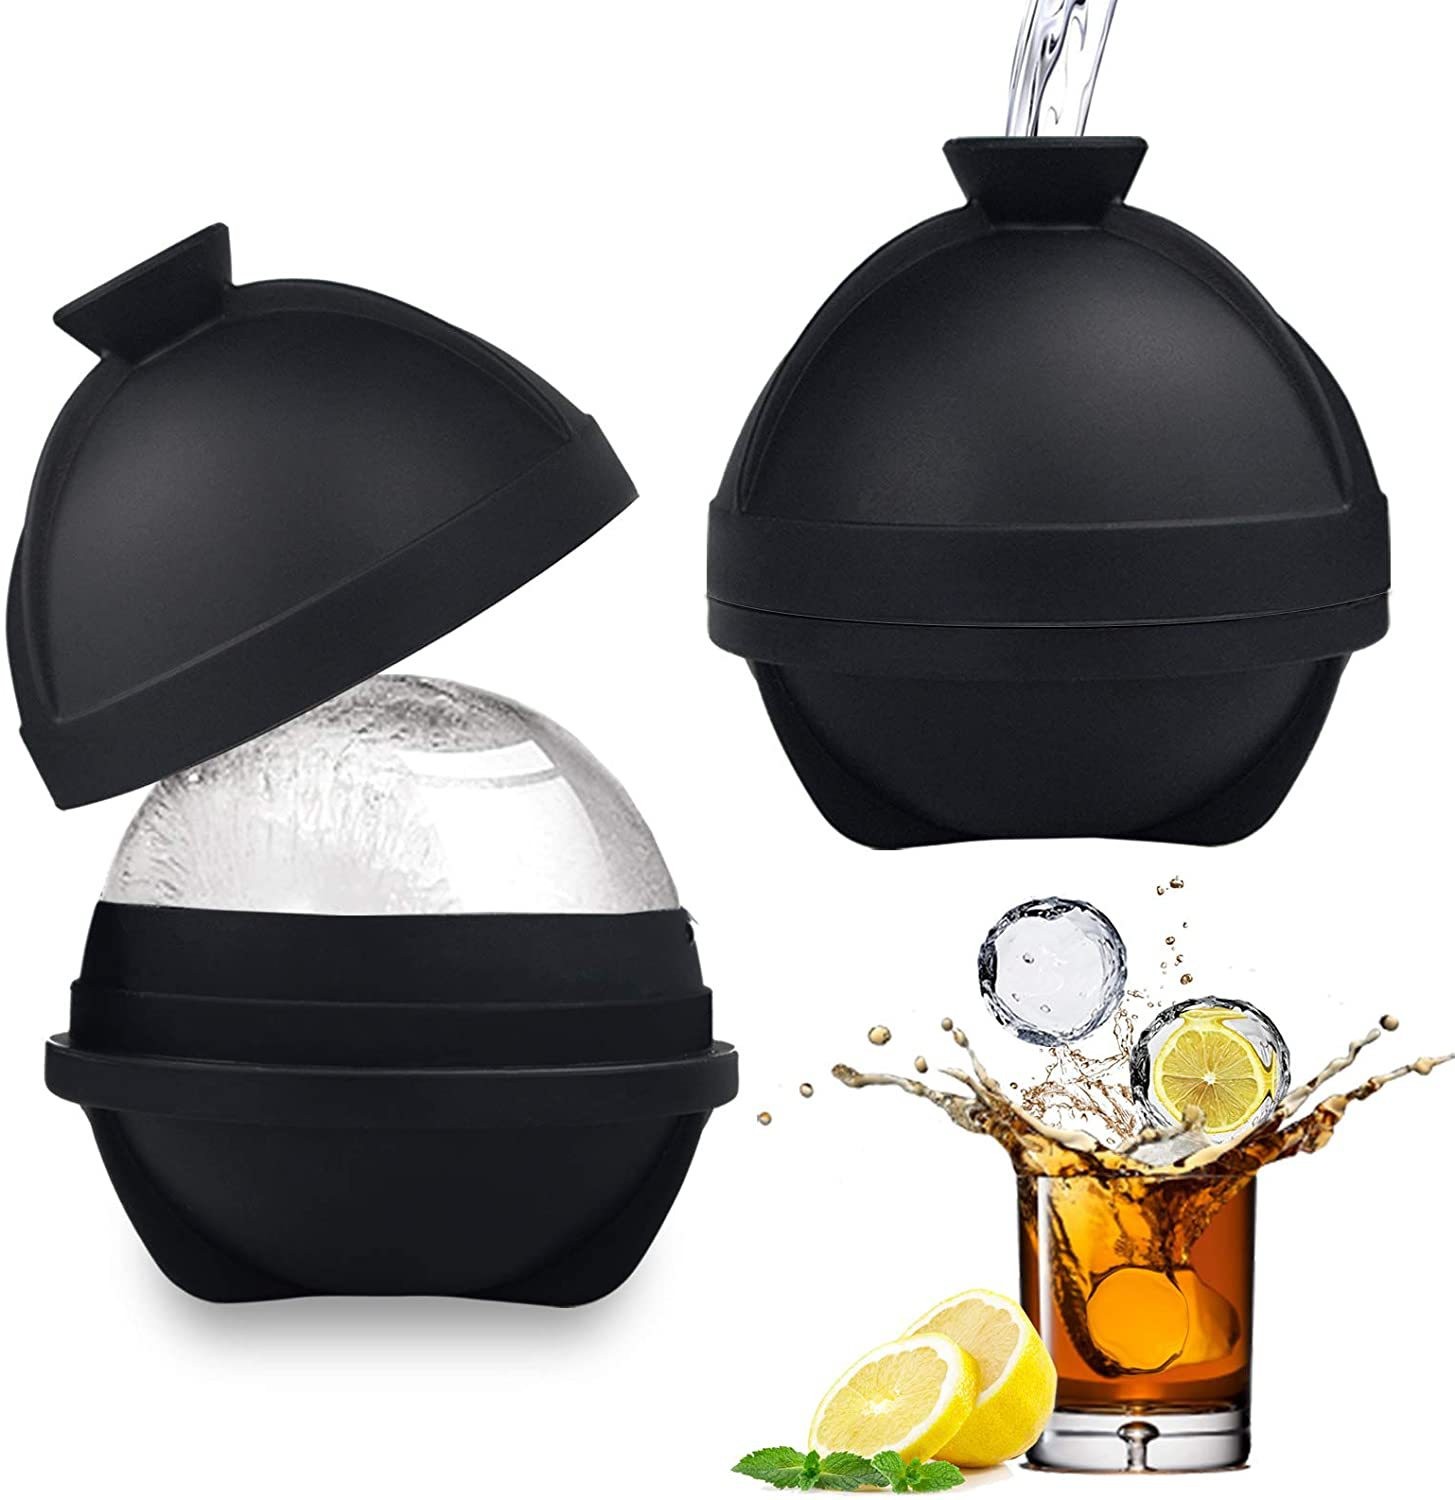 Extreme Ice Ball Molds Best Ice Barware Tool Capacity Mold Makes 2.5 Inch Large Whiskey Ice Balls